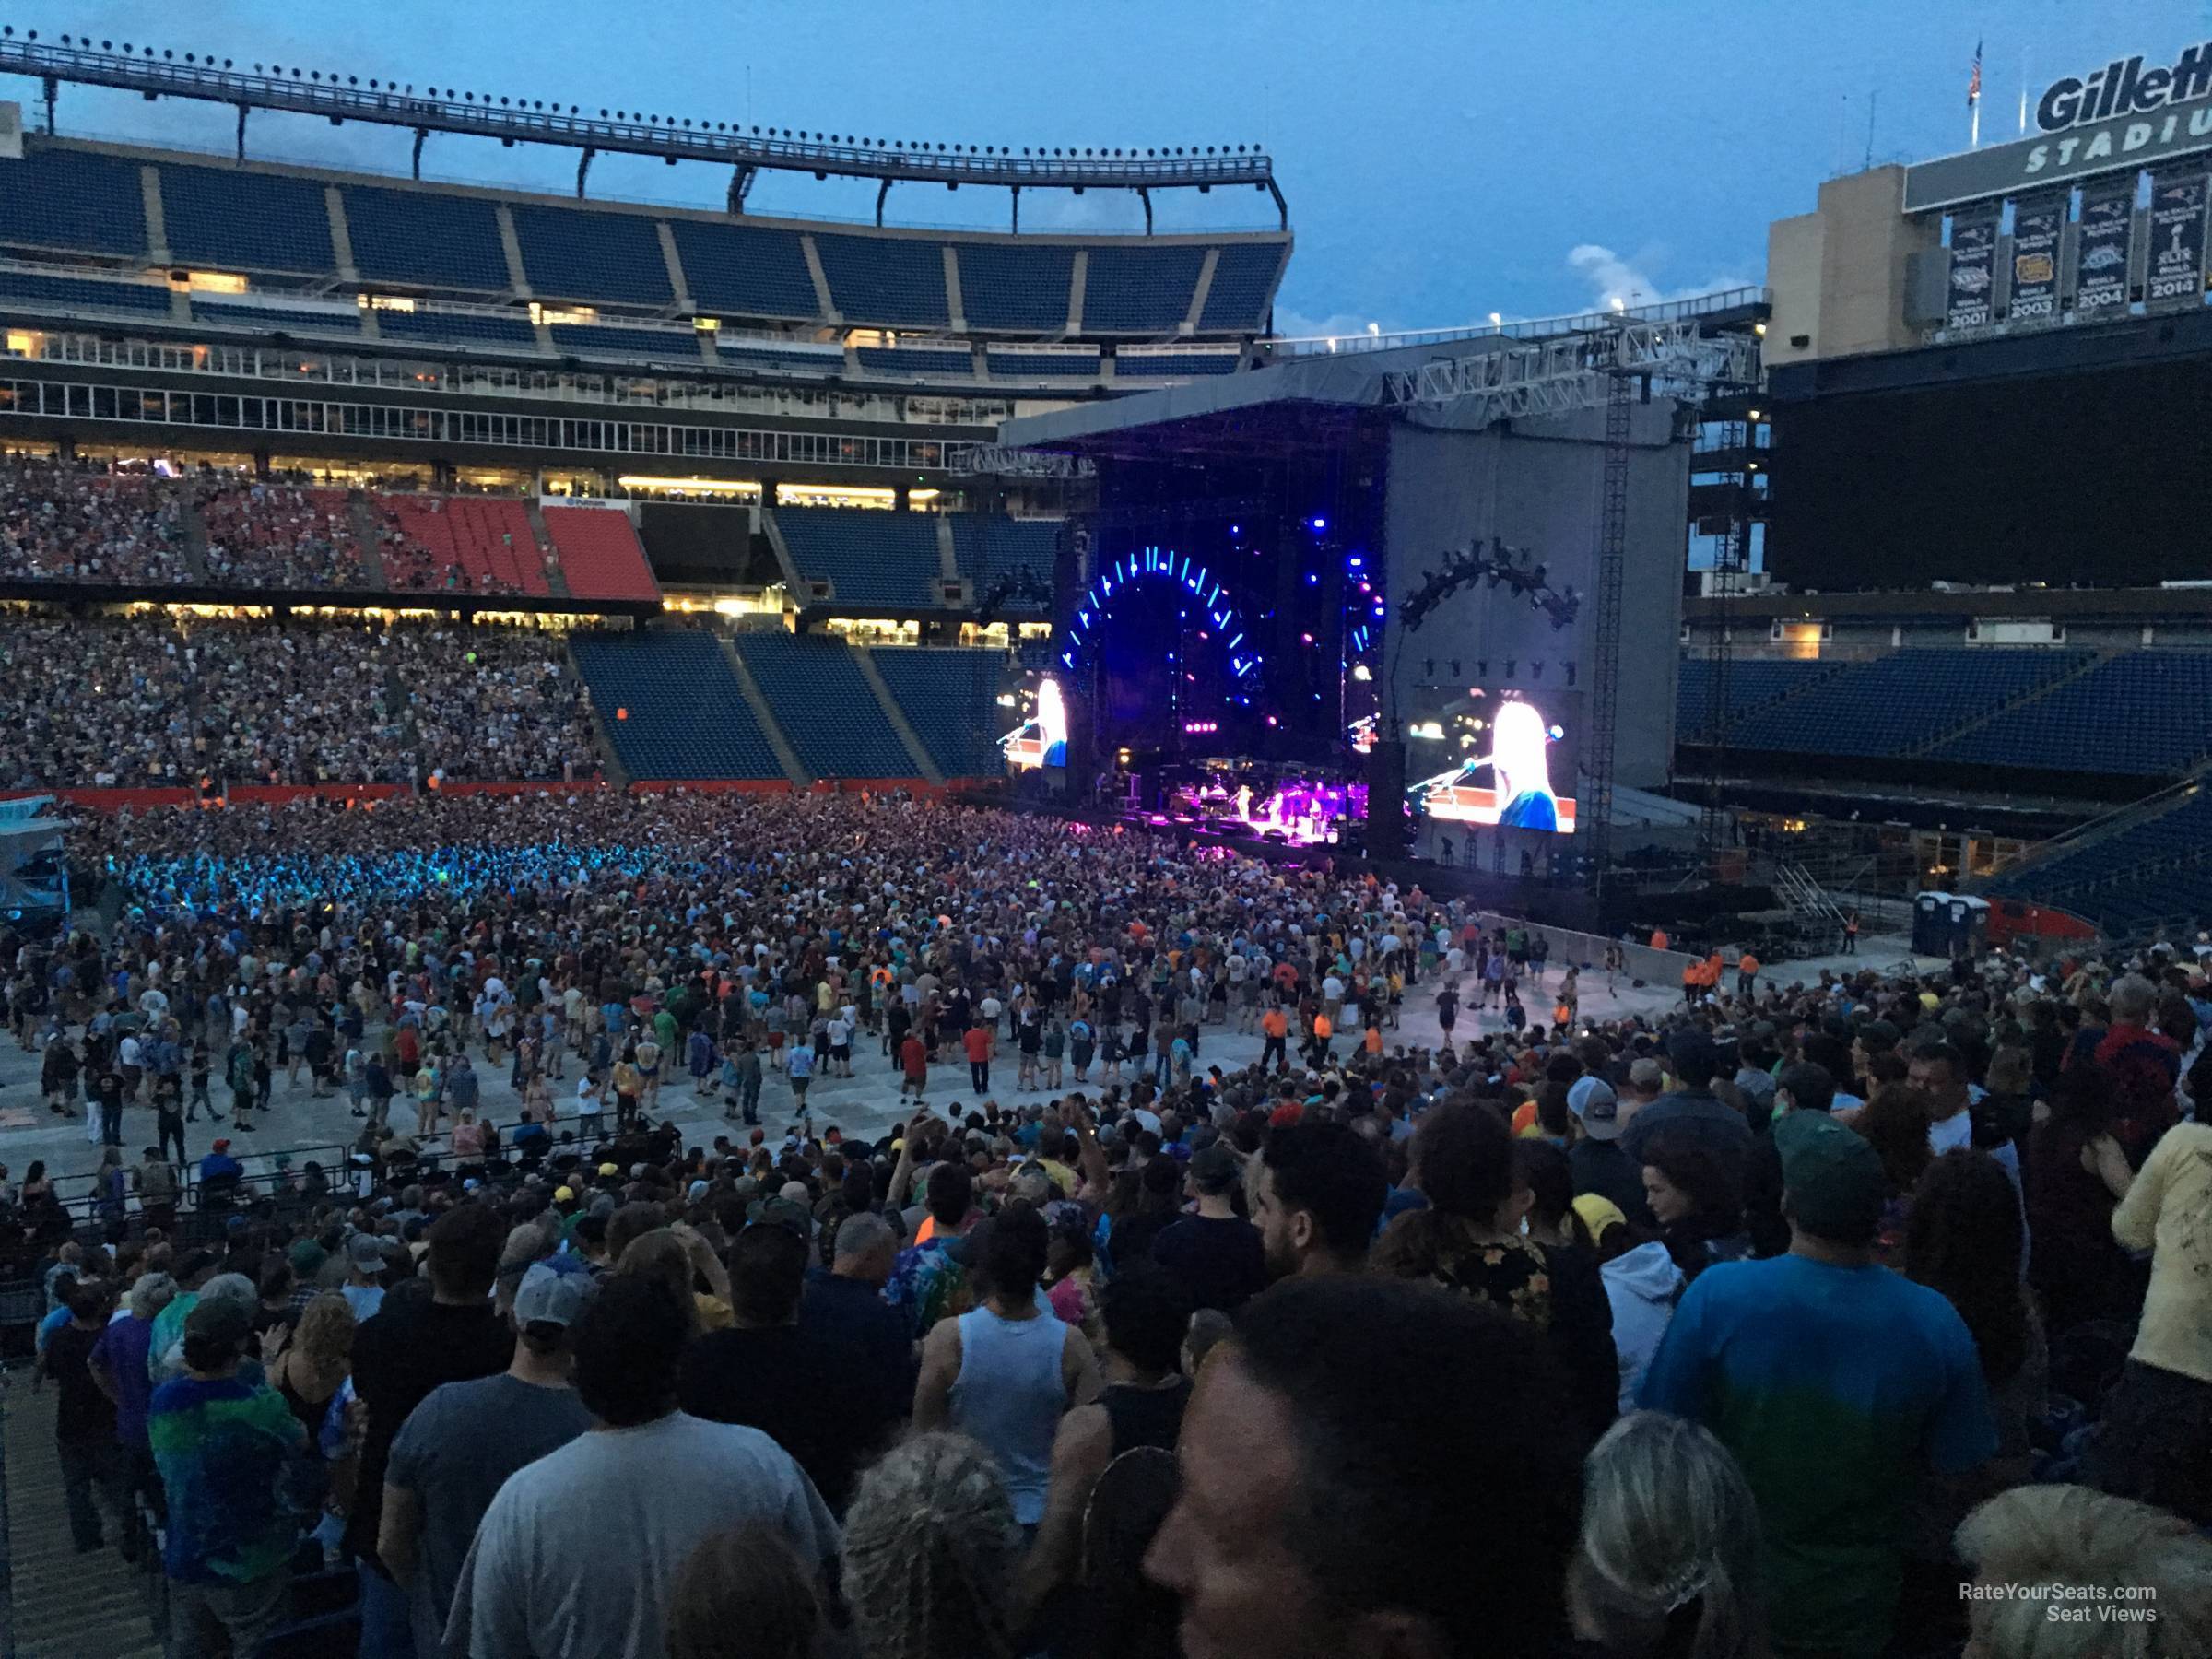 section 131, row 38 seat view  for concert - gillette stadium